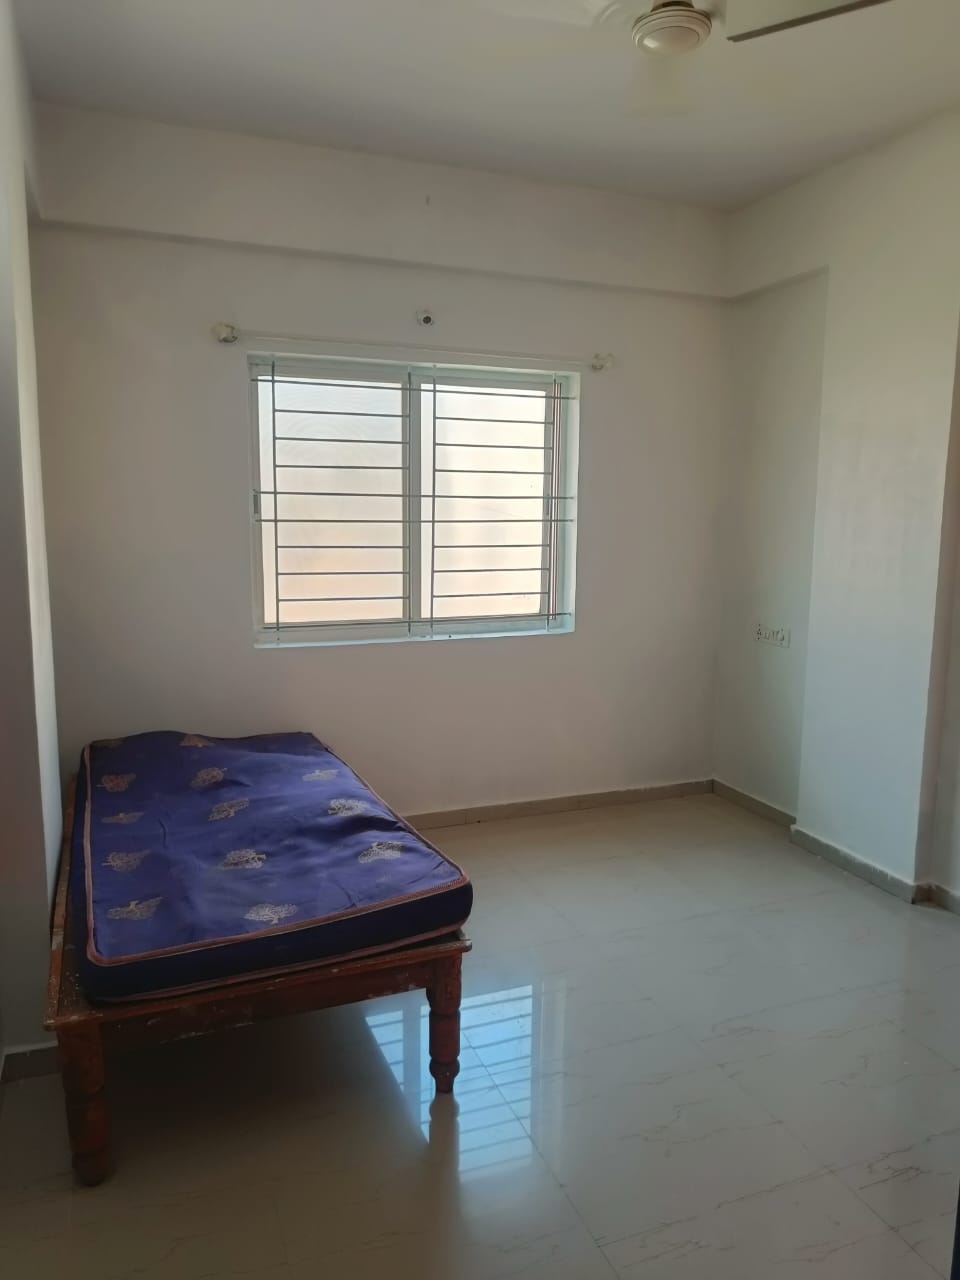 2 BHK Residential Apartment for Lease Only at JAML2 - 2345 in Bellahalli